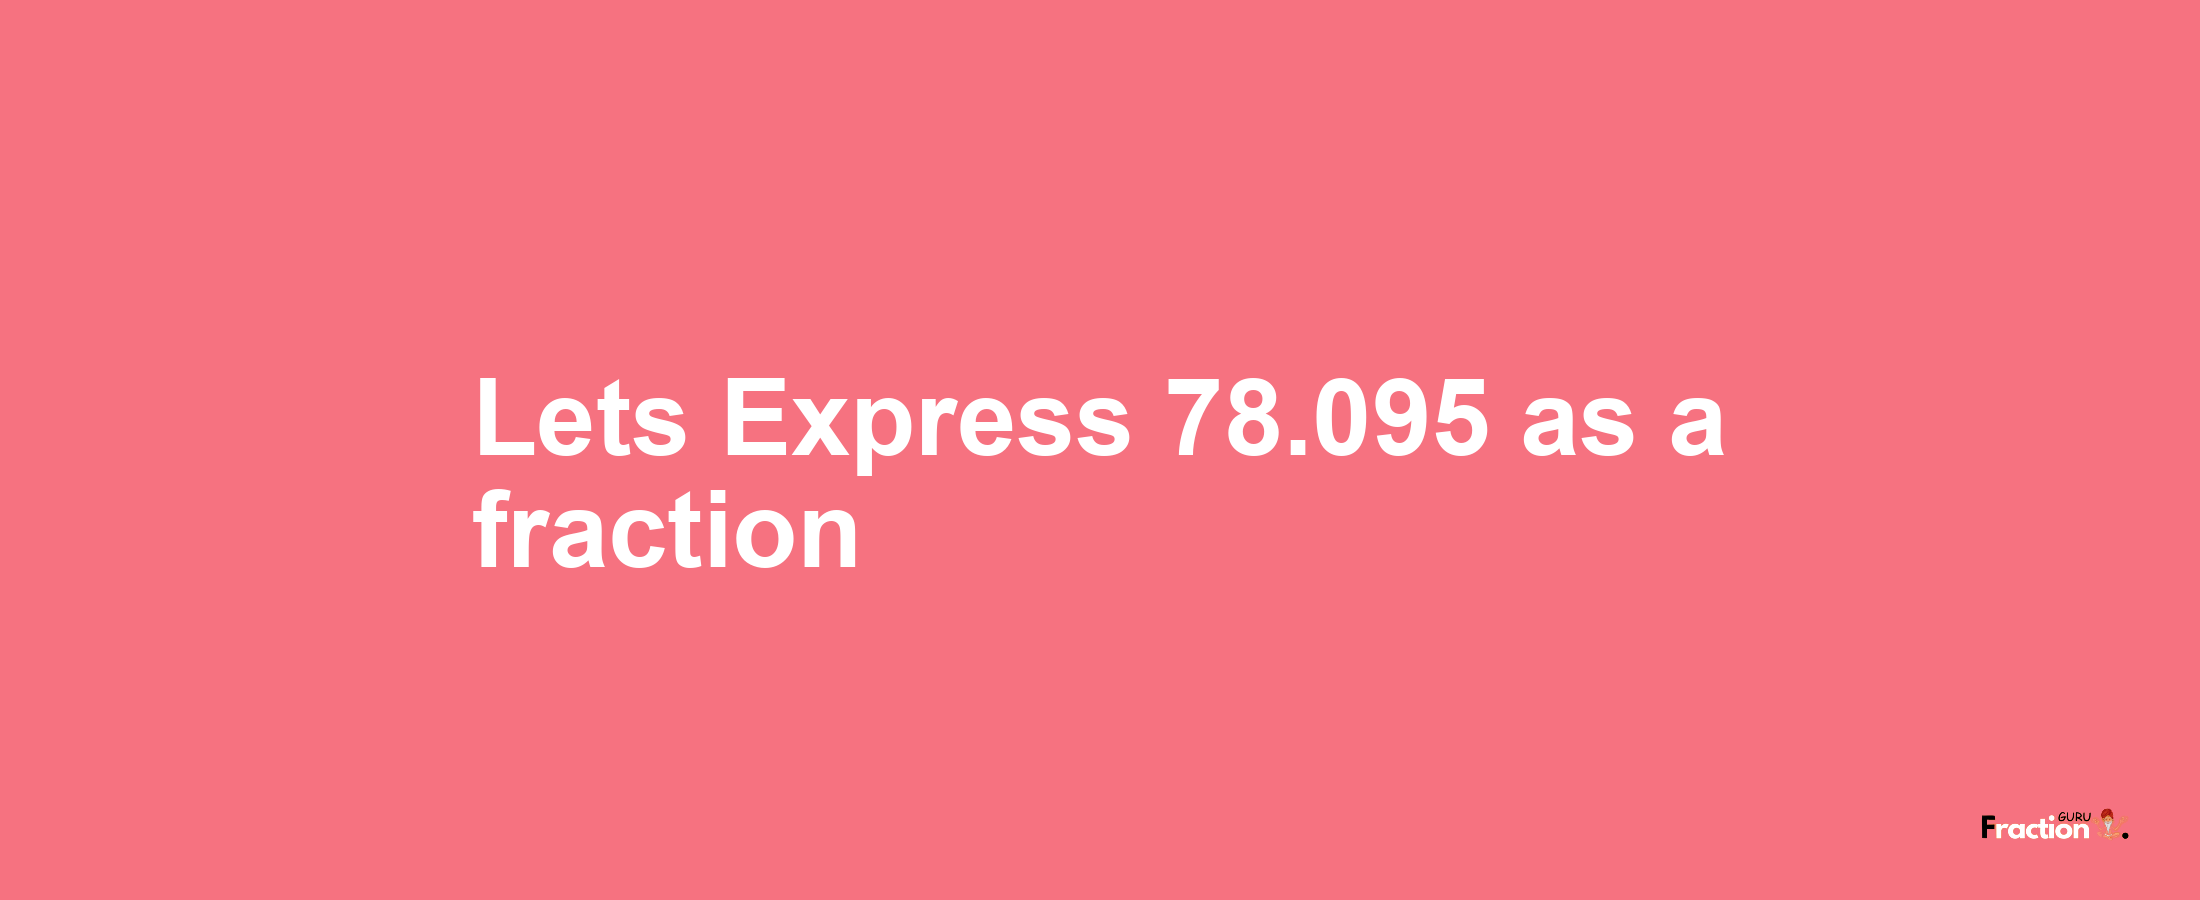 Lets Express 78.095 as afraction